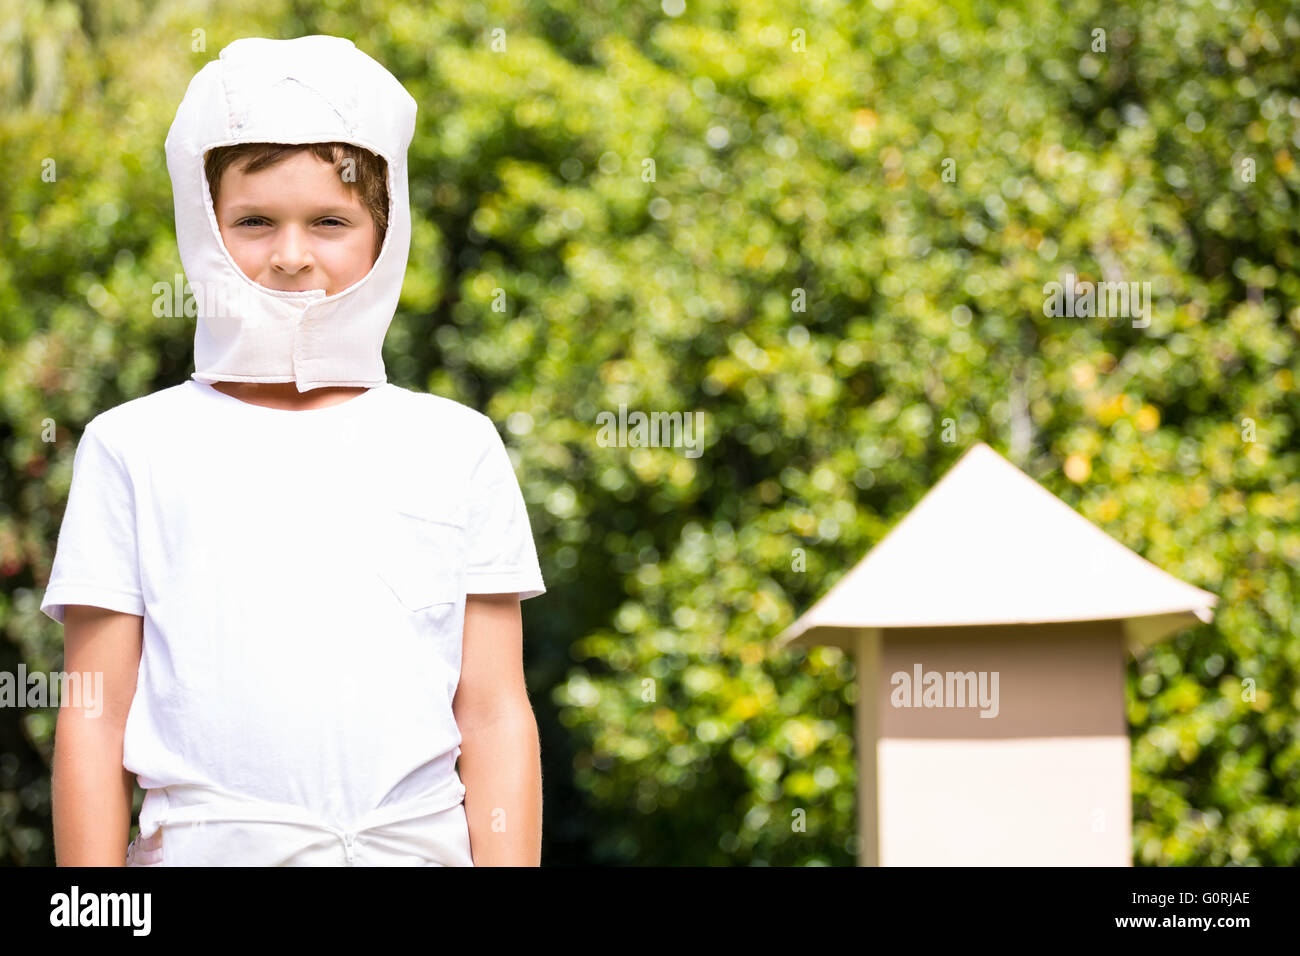 A kid with a costume is watching the lens Stock Photo